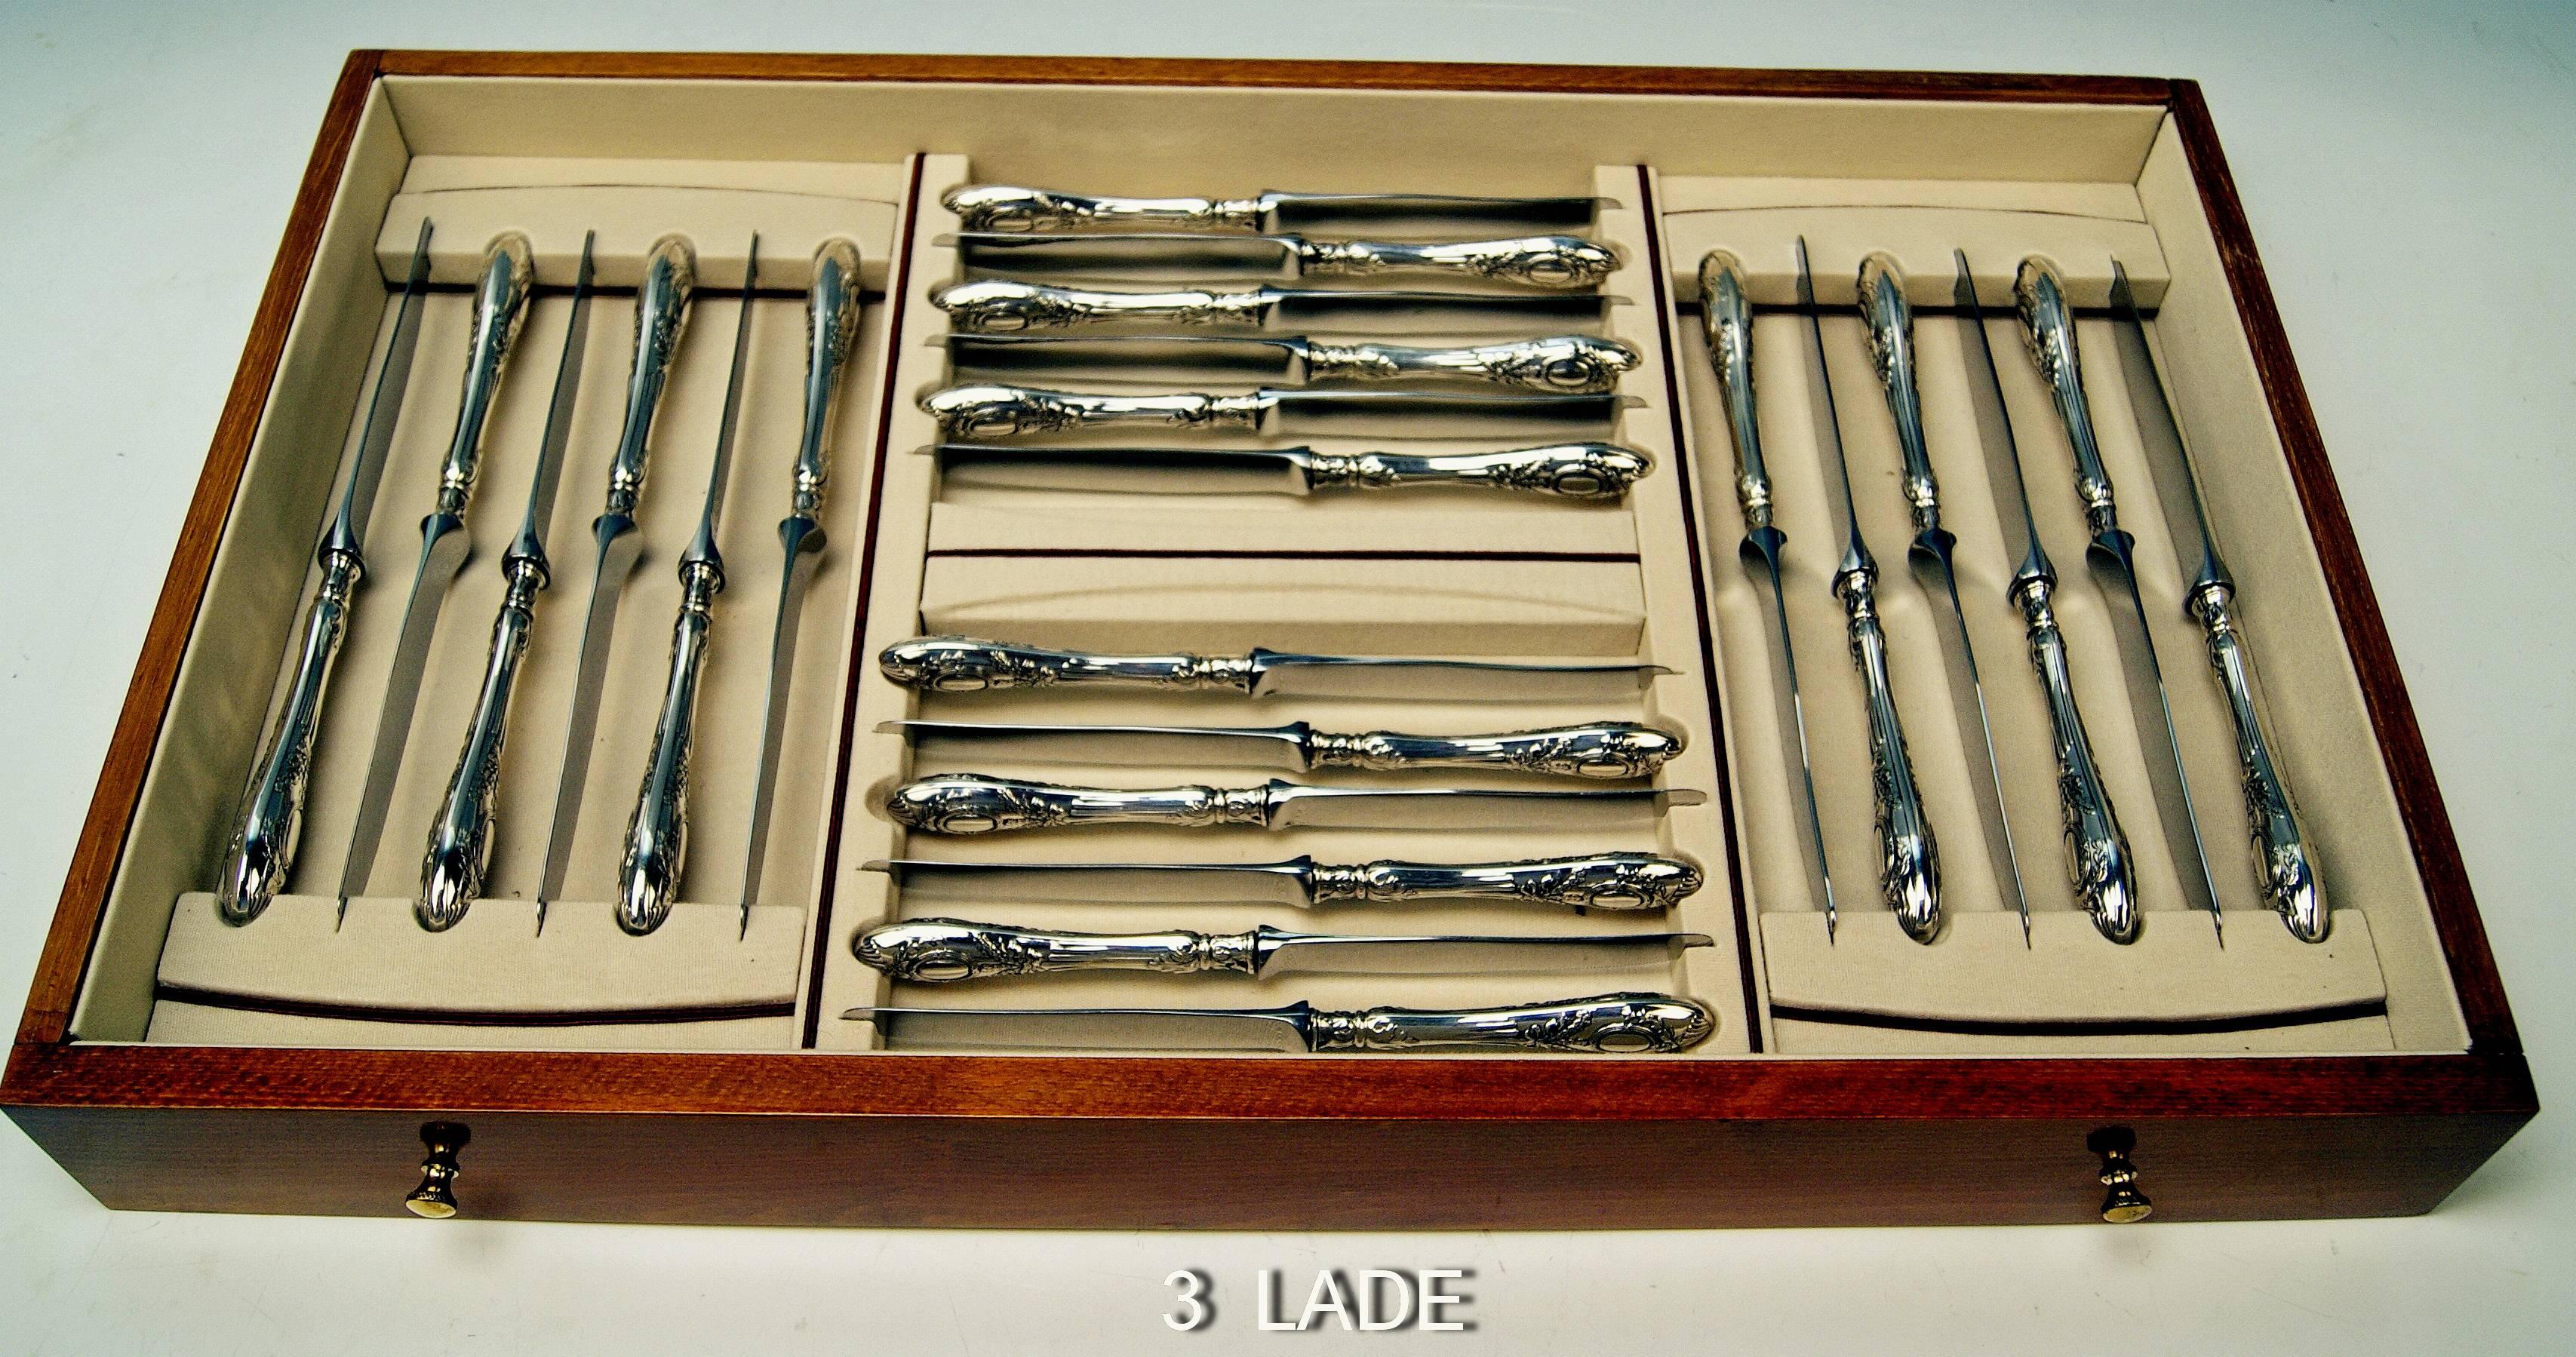 Early 20th Century Silver Art Nouveau 116-Piece Flatware Cutlery 12 Pers, Lutz-Weiss Germany c.1900